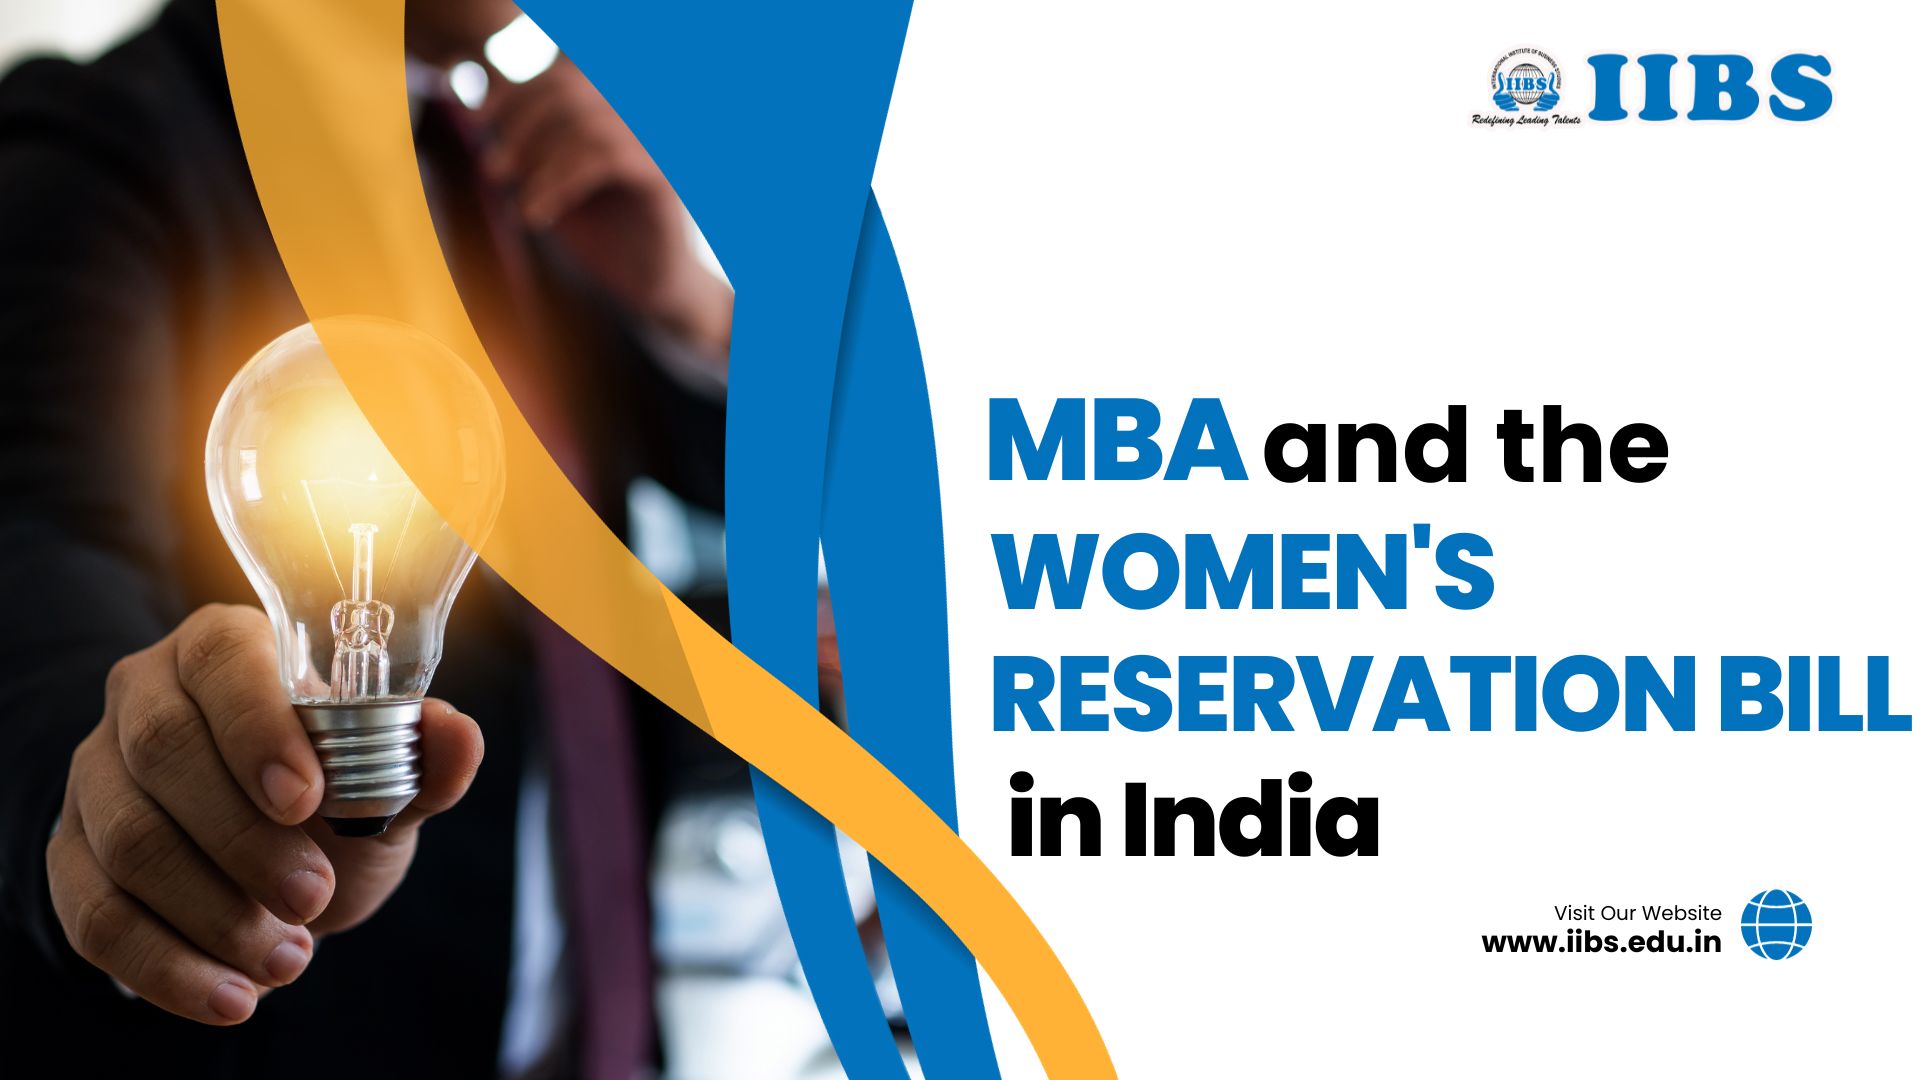  MBA and the Women's Reservation Bill in India